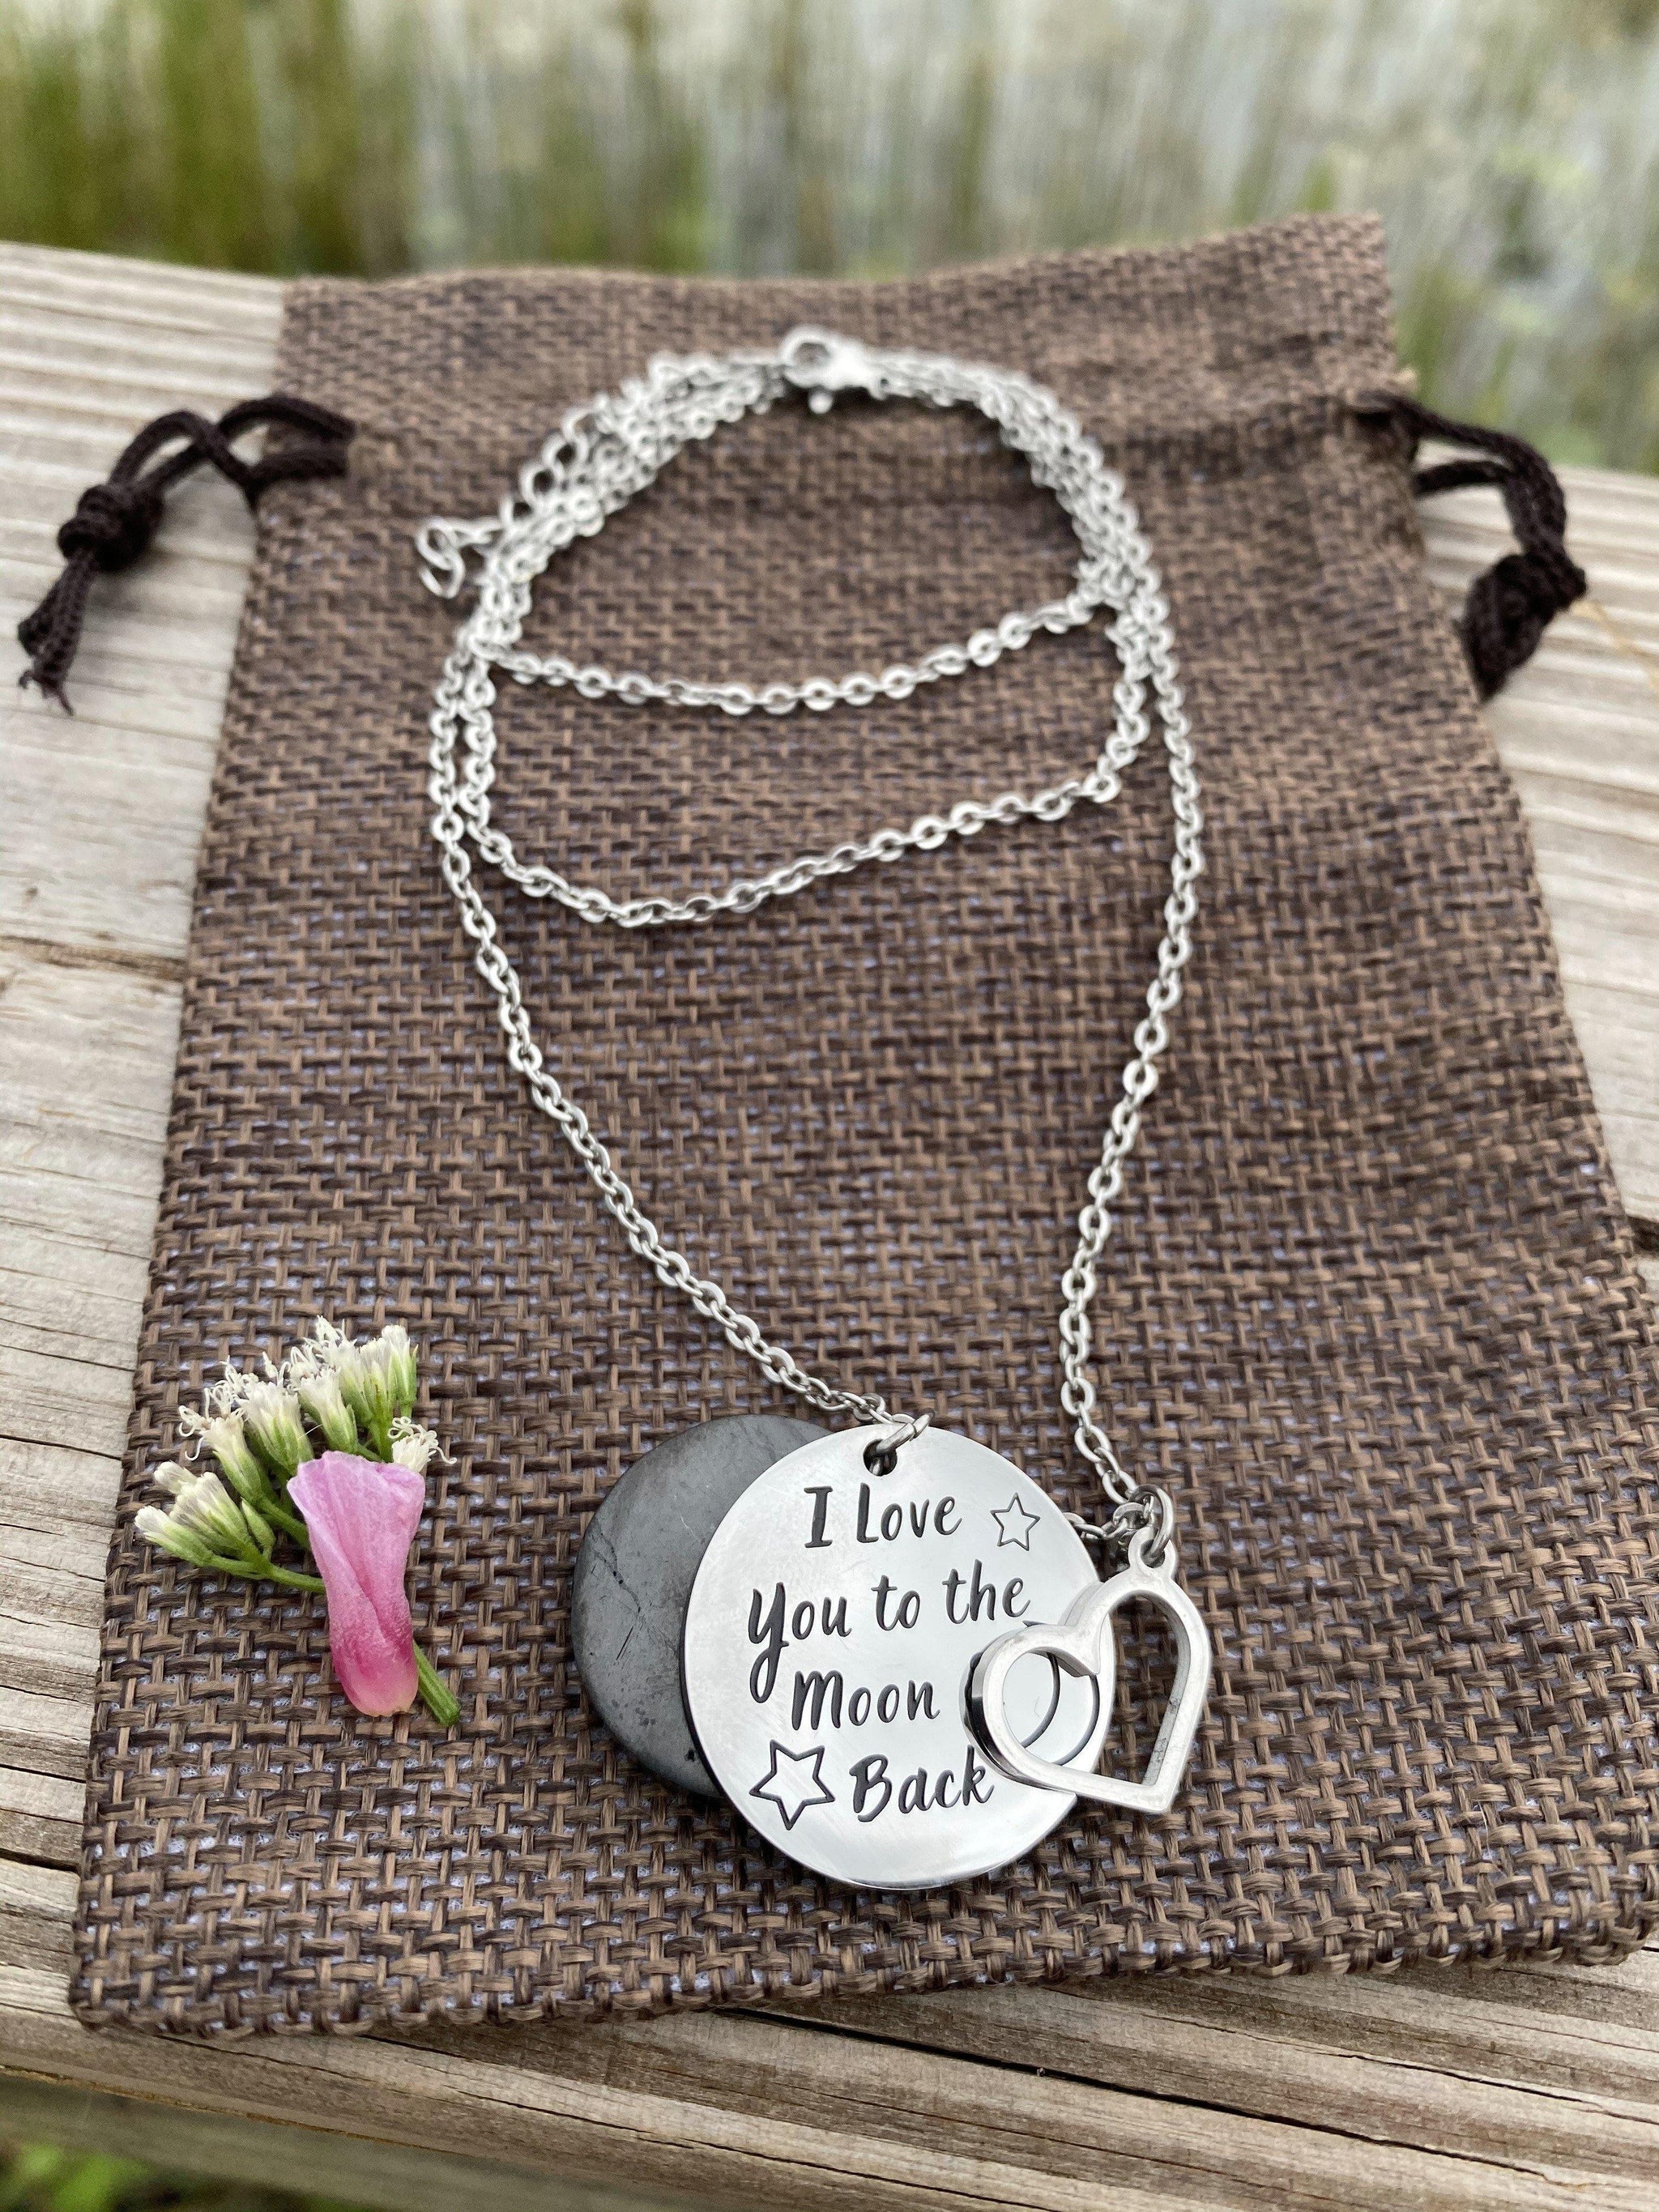 Dog Tag I Love You To The Moon And Back Necklace – Sierra Metal Design